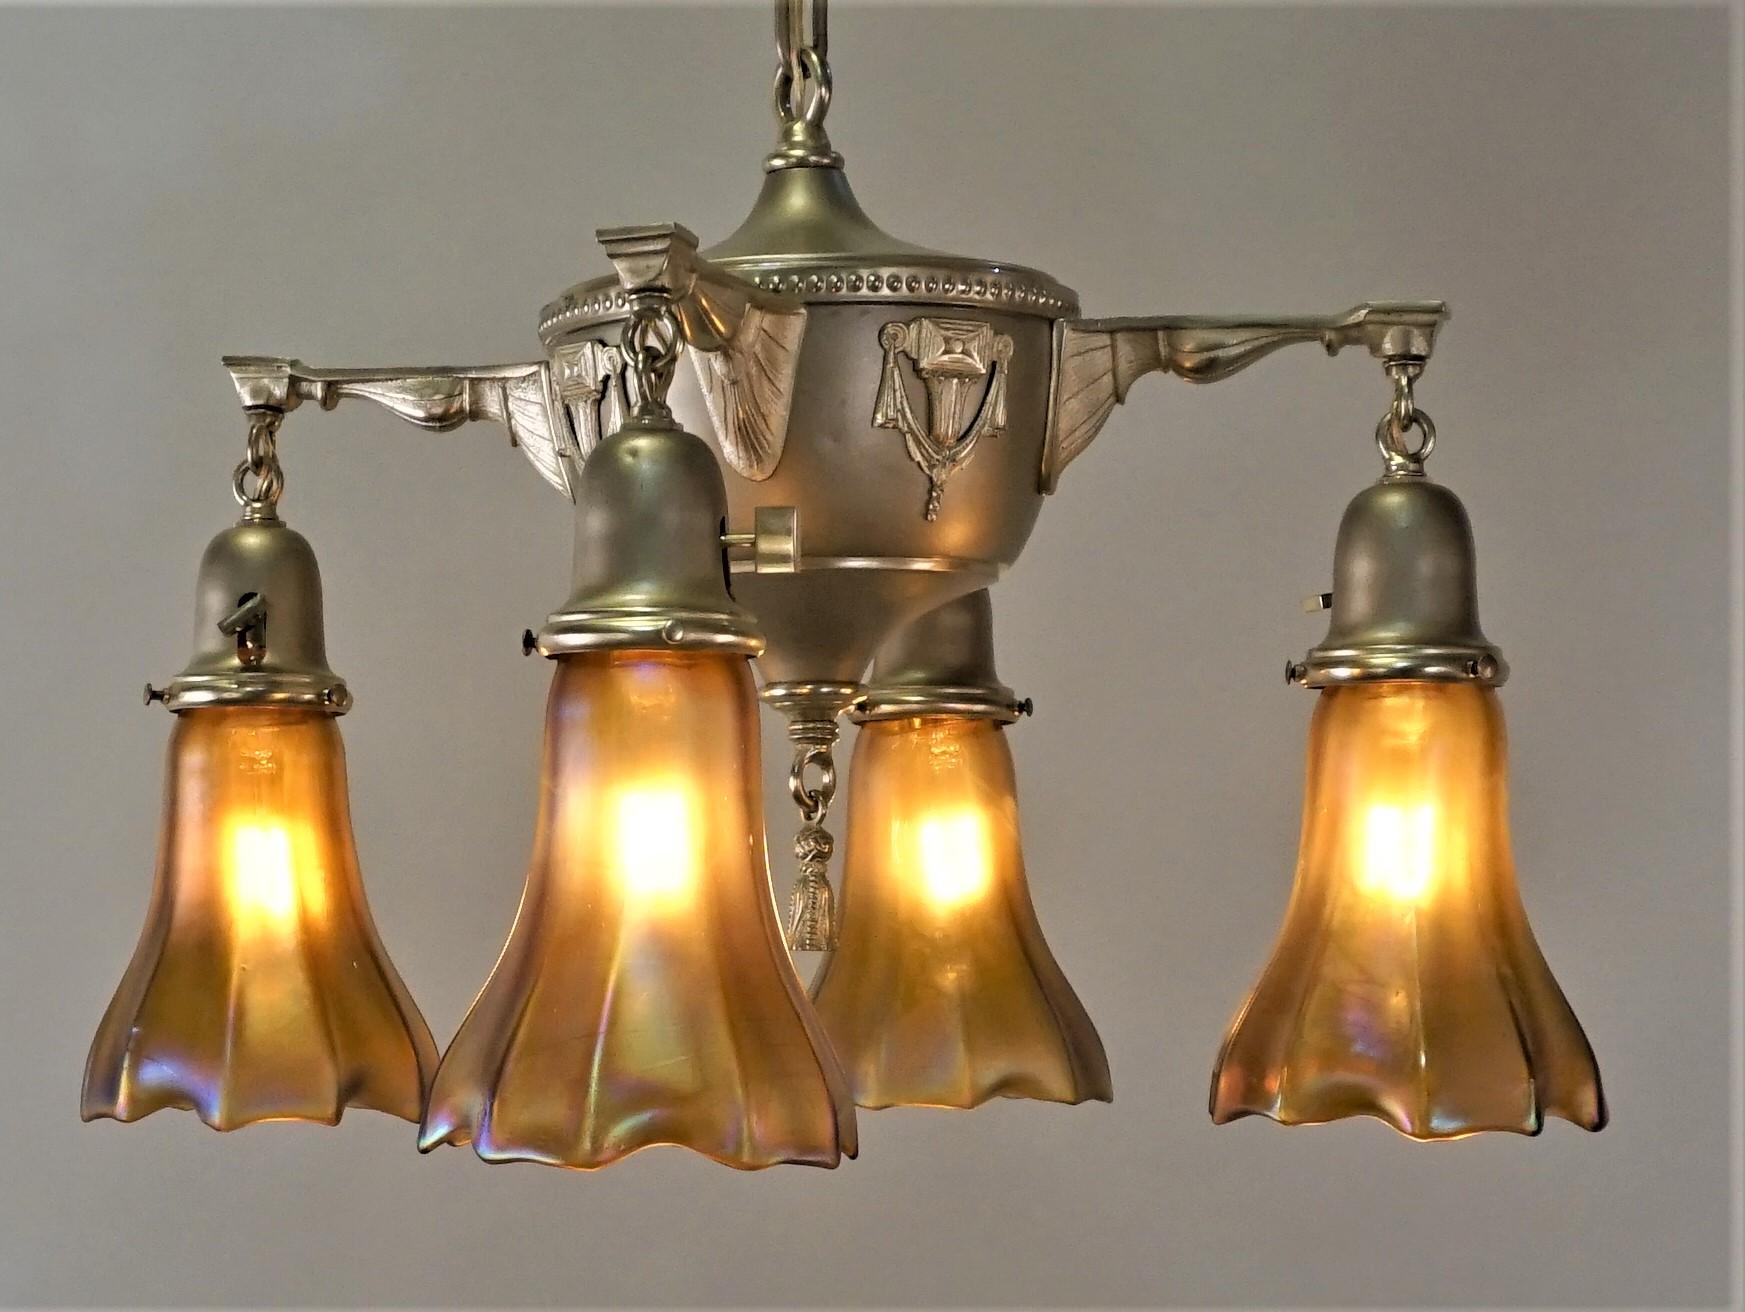 Elegant 1920s polished and stain finish brass chandelier with art glass shades.